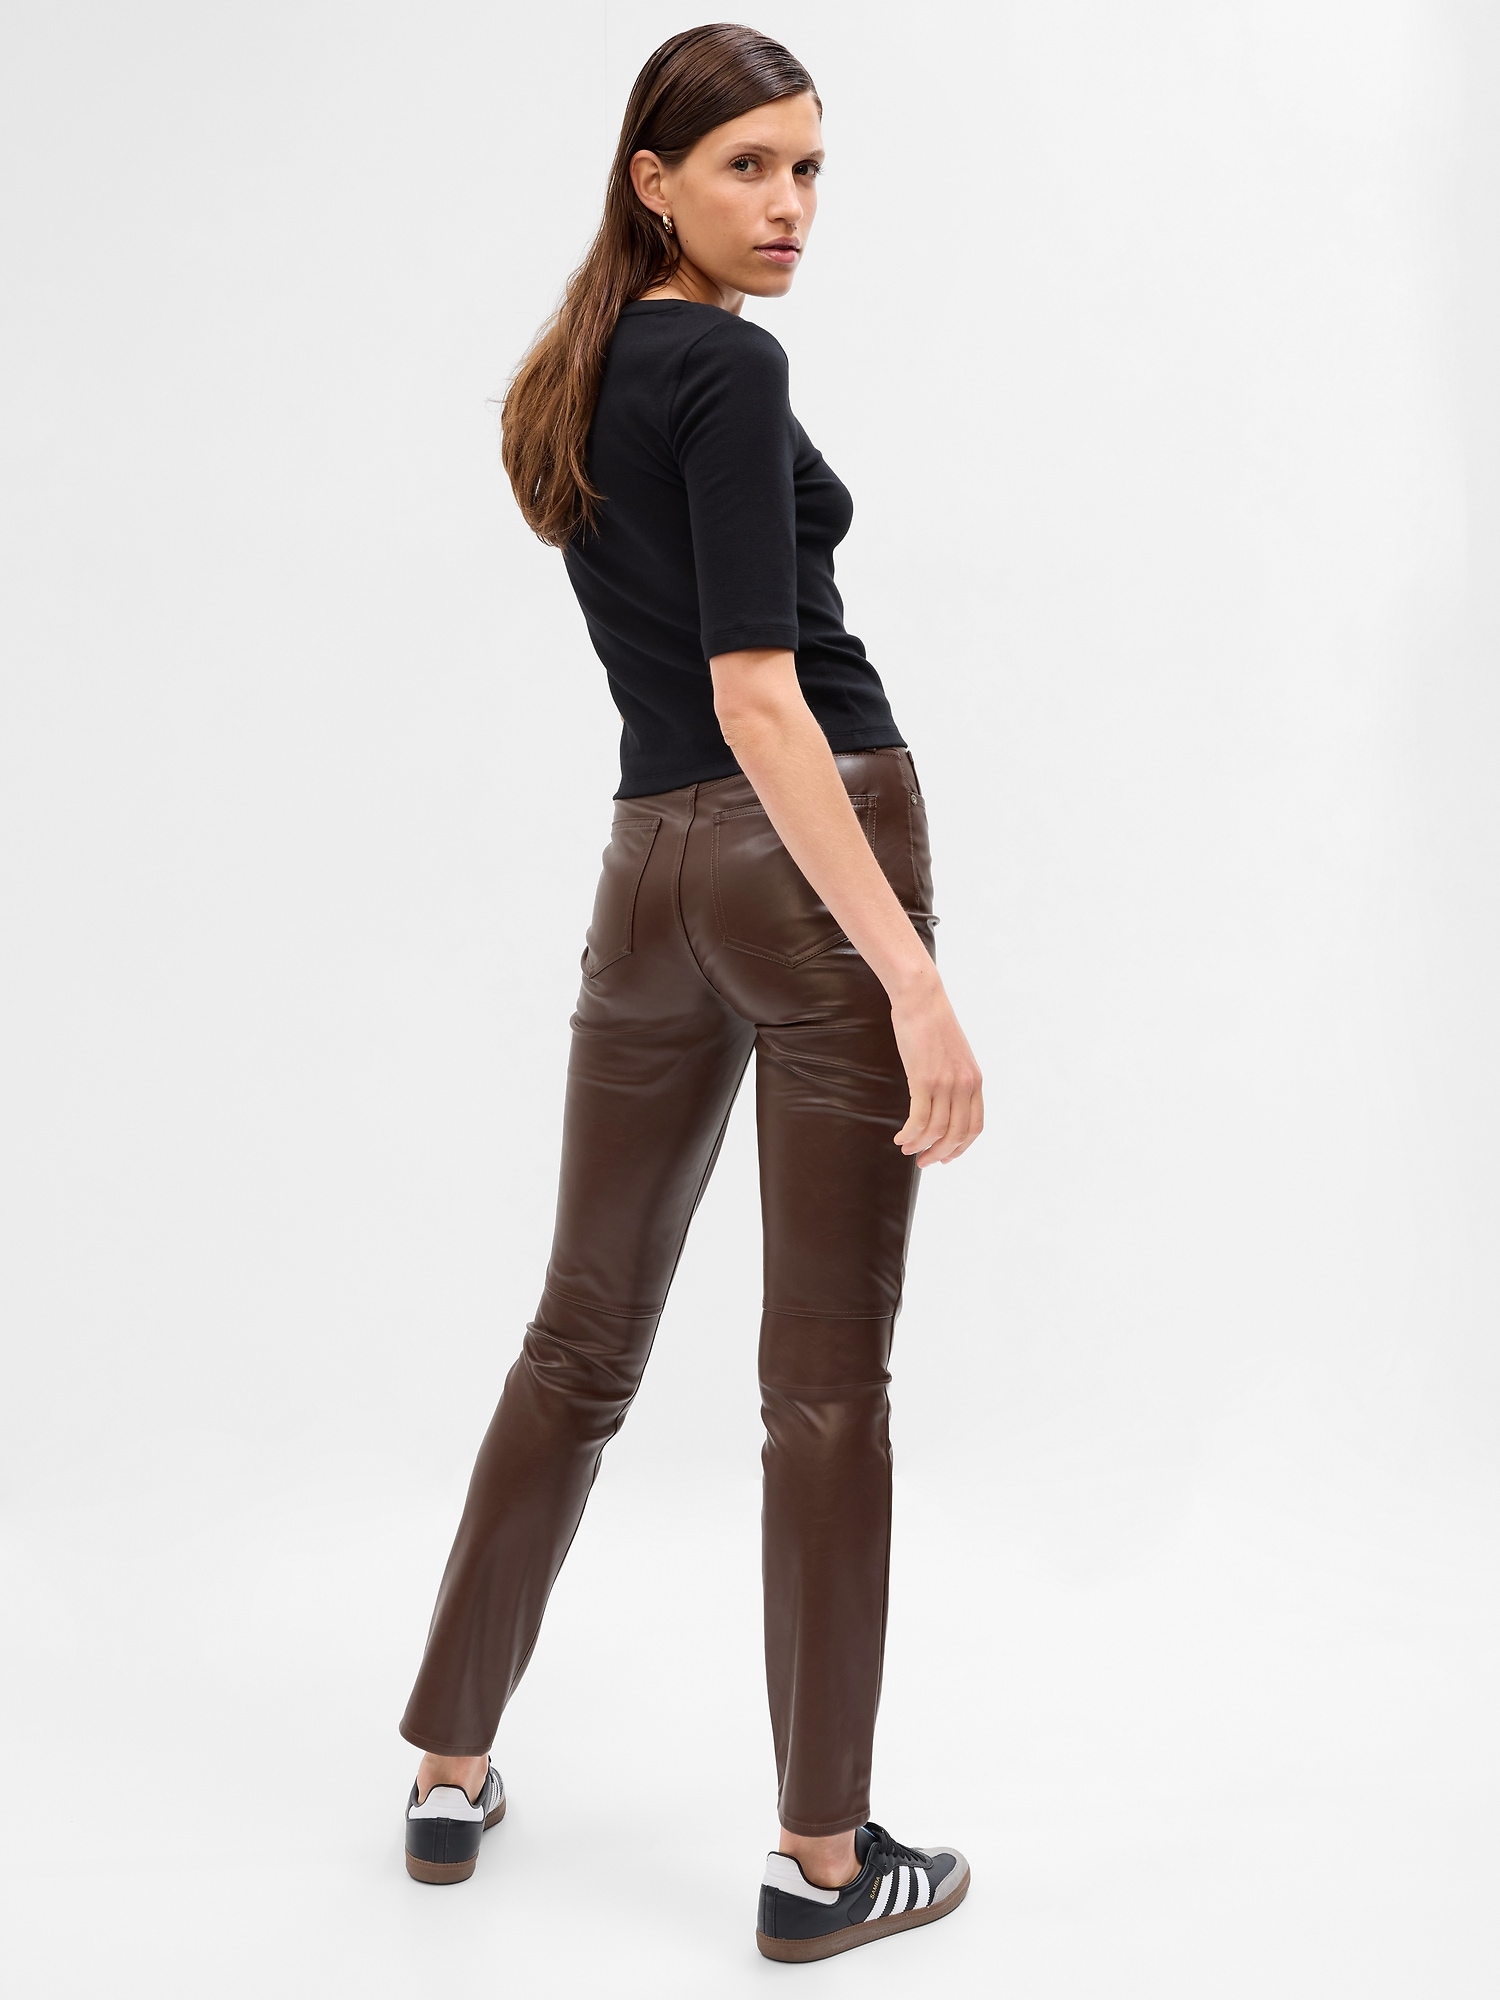 Womens Faux Leather Pants, Everyday Low Prices